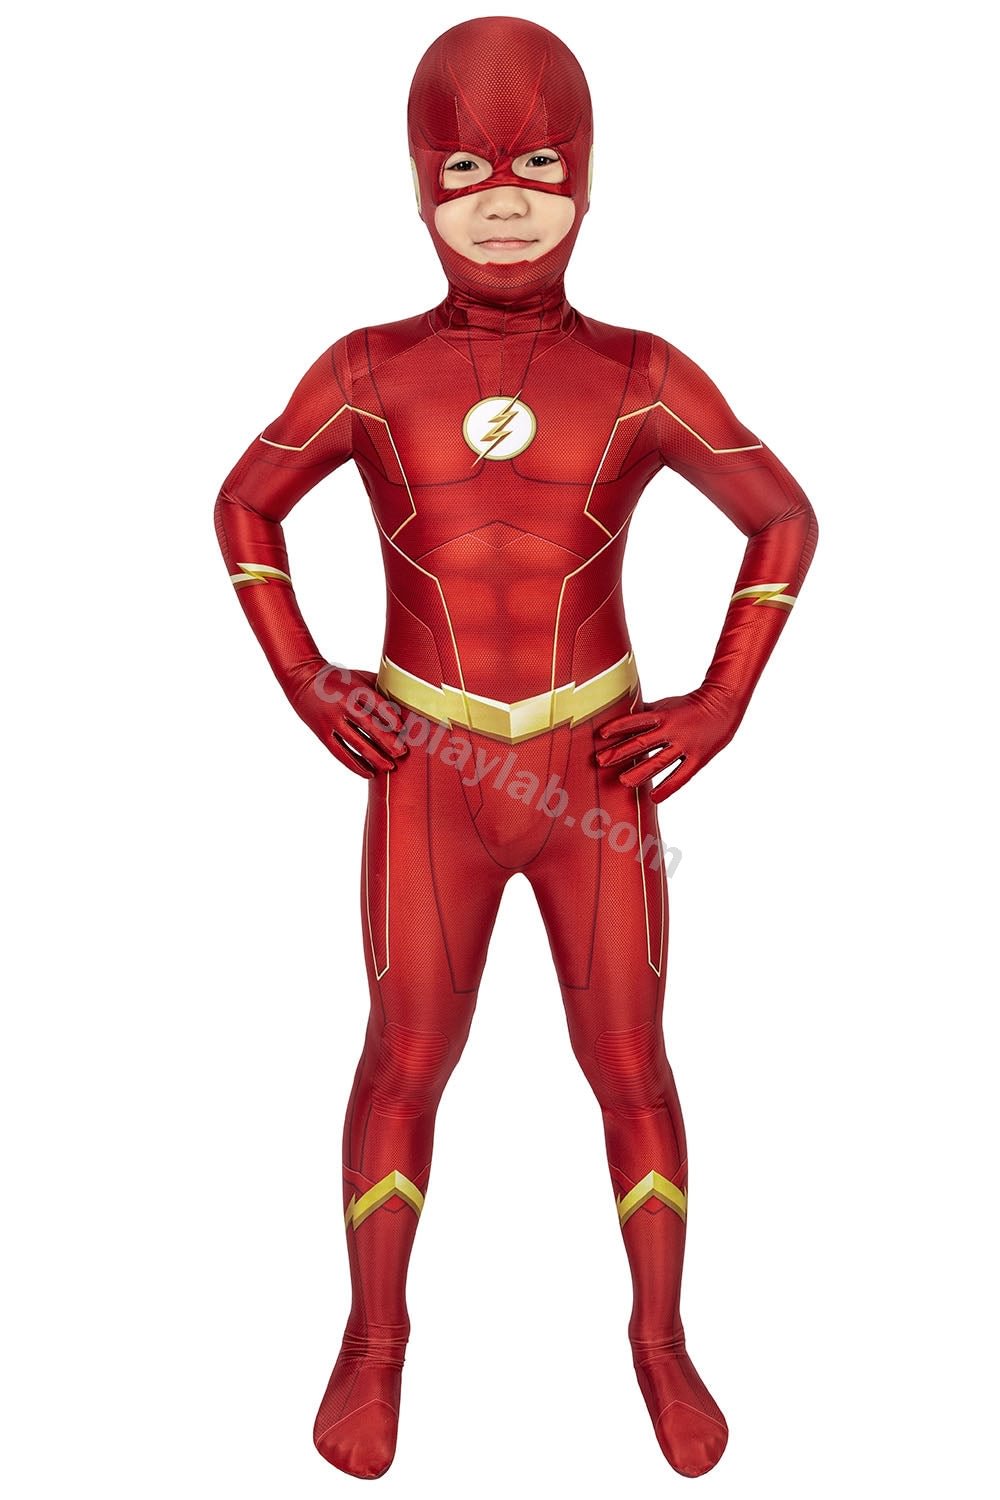 Kids The Flash Cosplay Suit Christmas Halloween Gift Idea For Children By CosplayLab